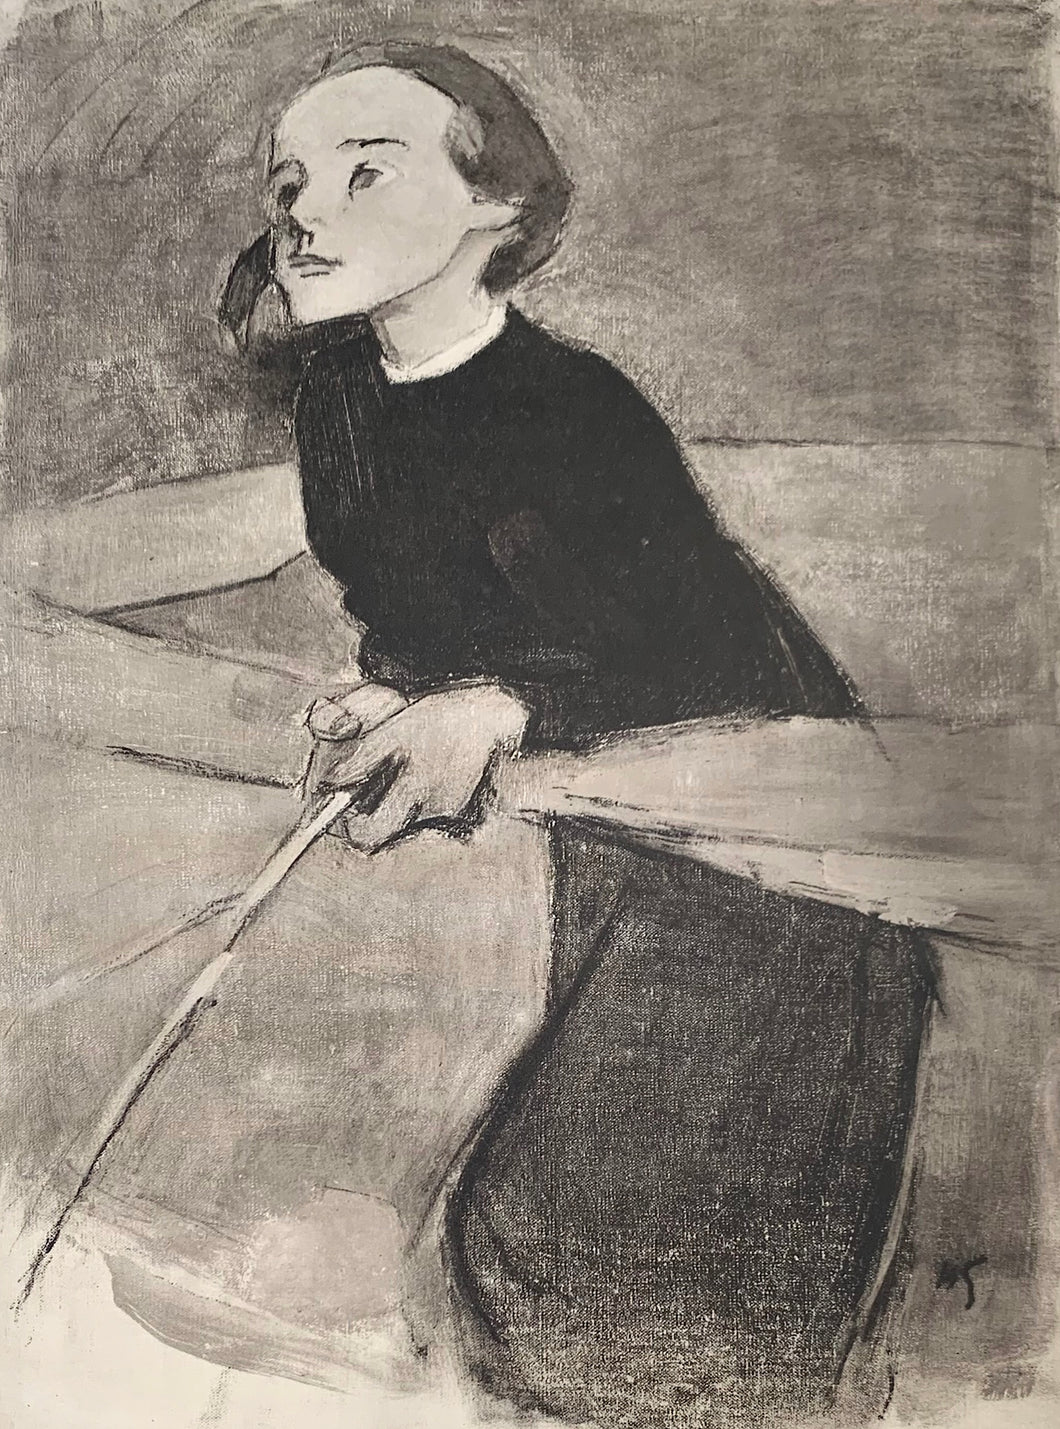 'Girl by the Fence, 1941' (Flicka vid gärdesgard, 1941) by Helene Schjerfbeck